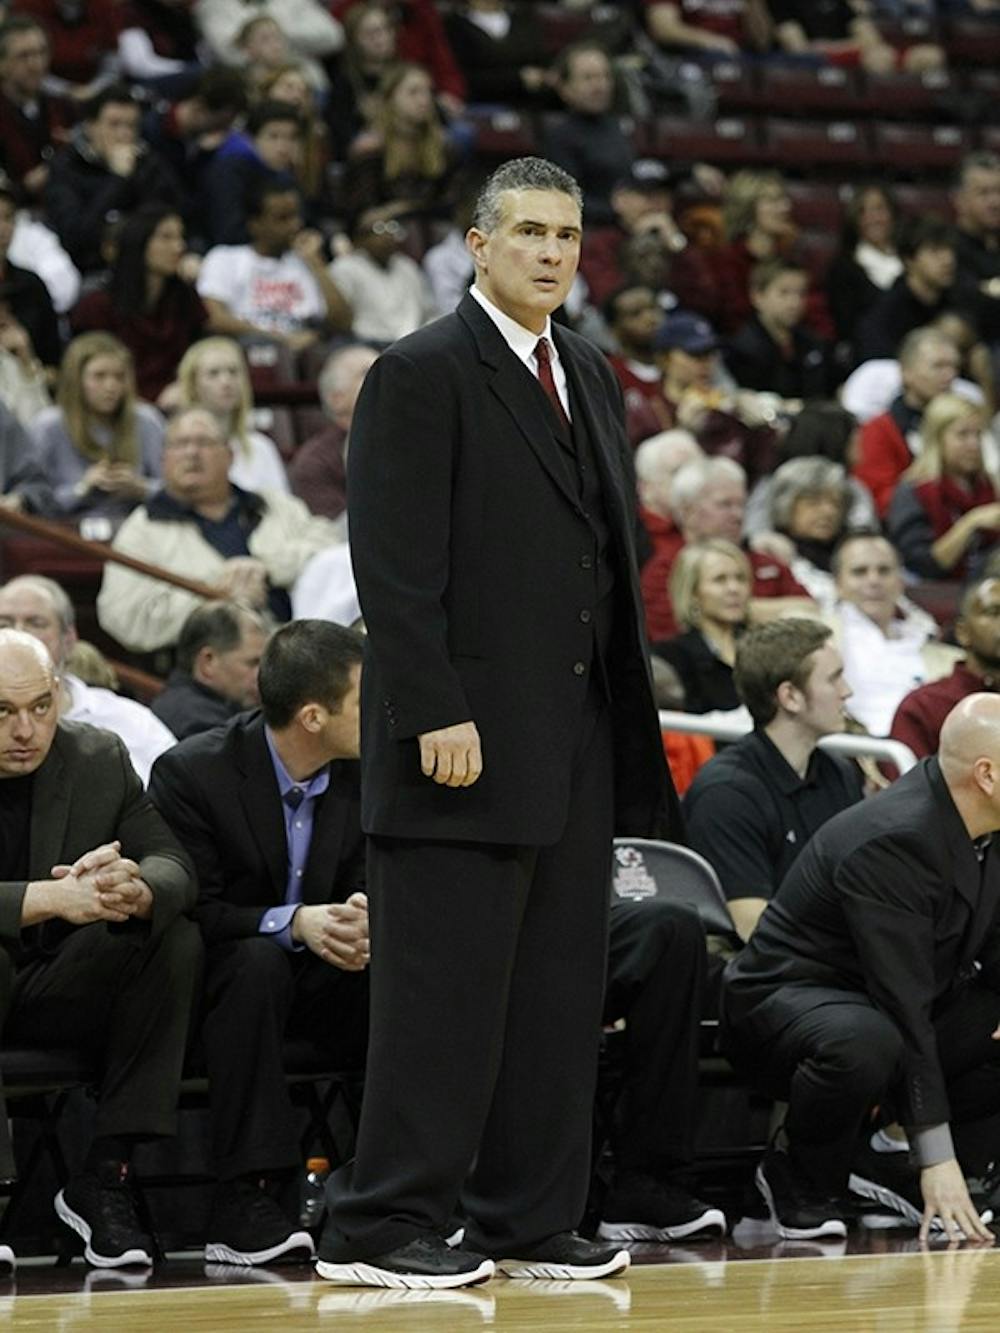 Head coach Frank Martin suffered the most lopsided loss of his coaching career in Gainesville, Fla. against the Gators.